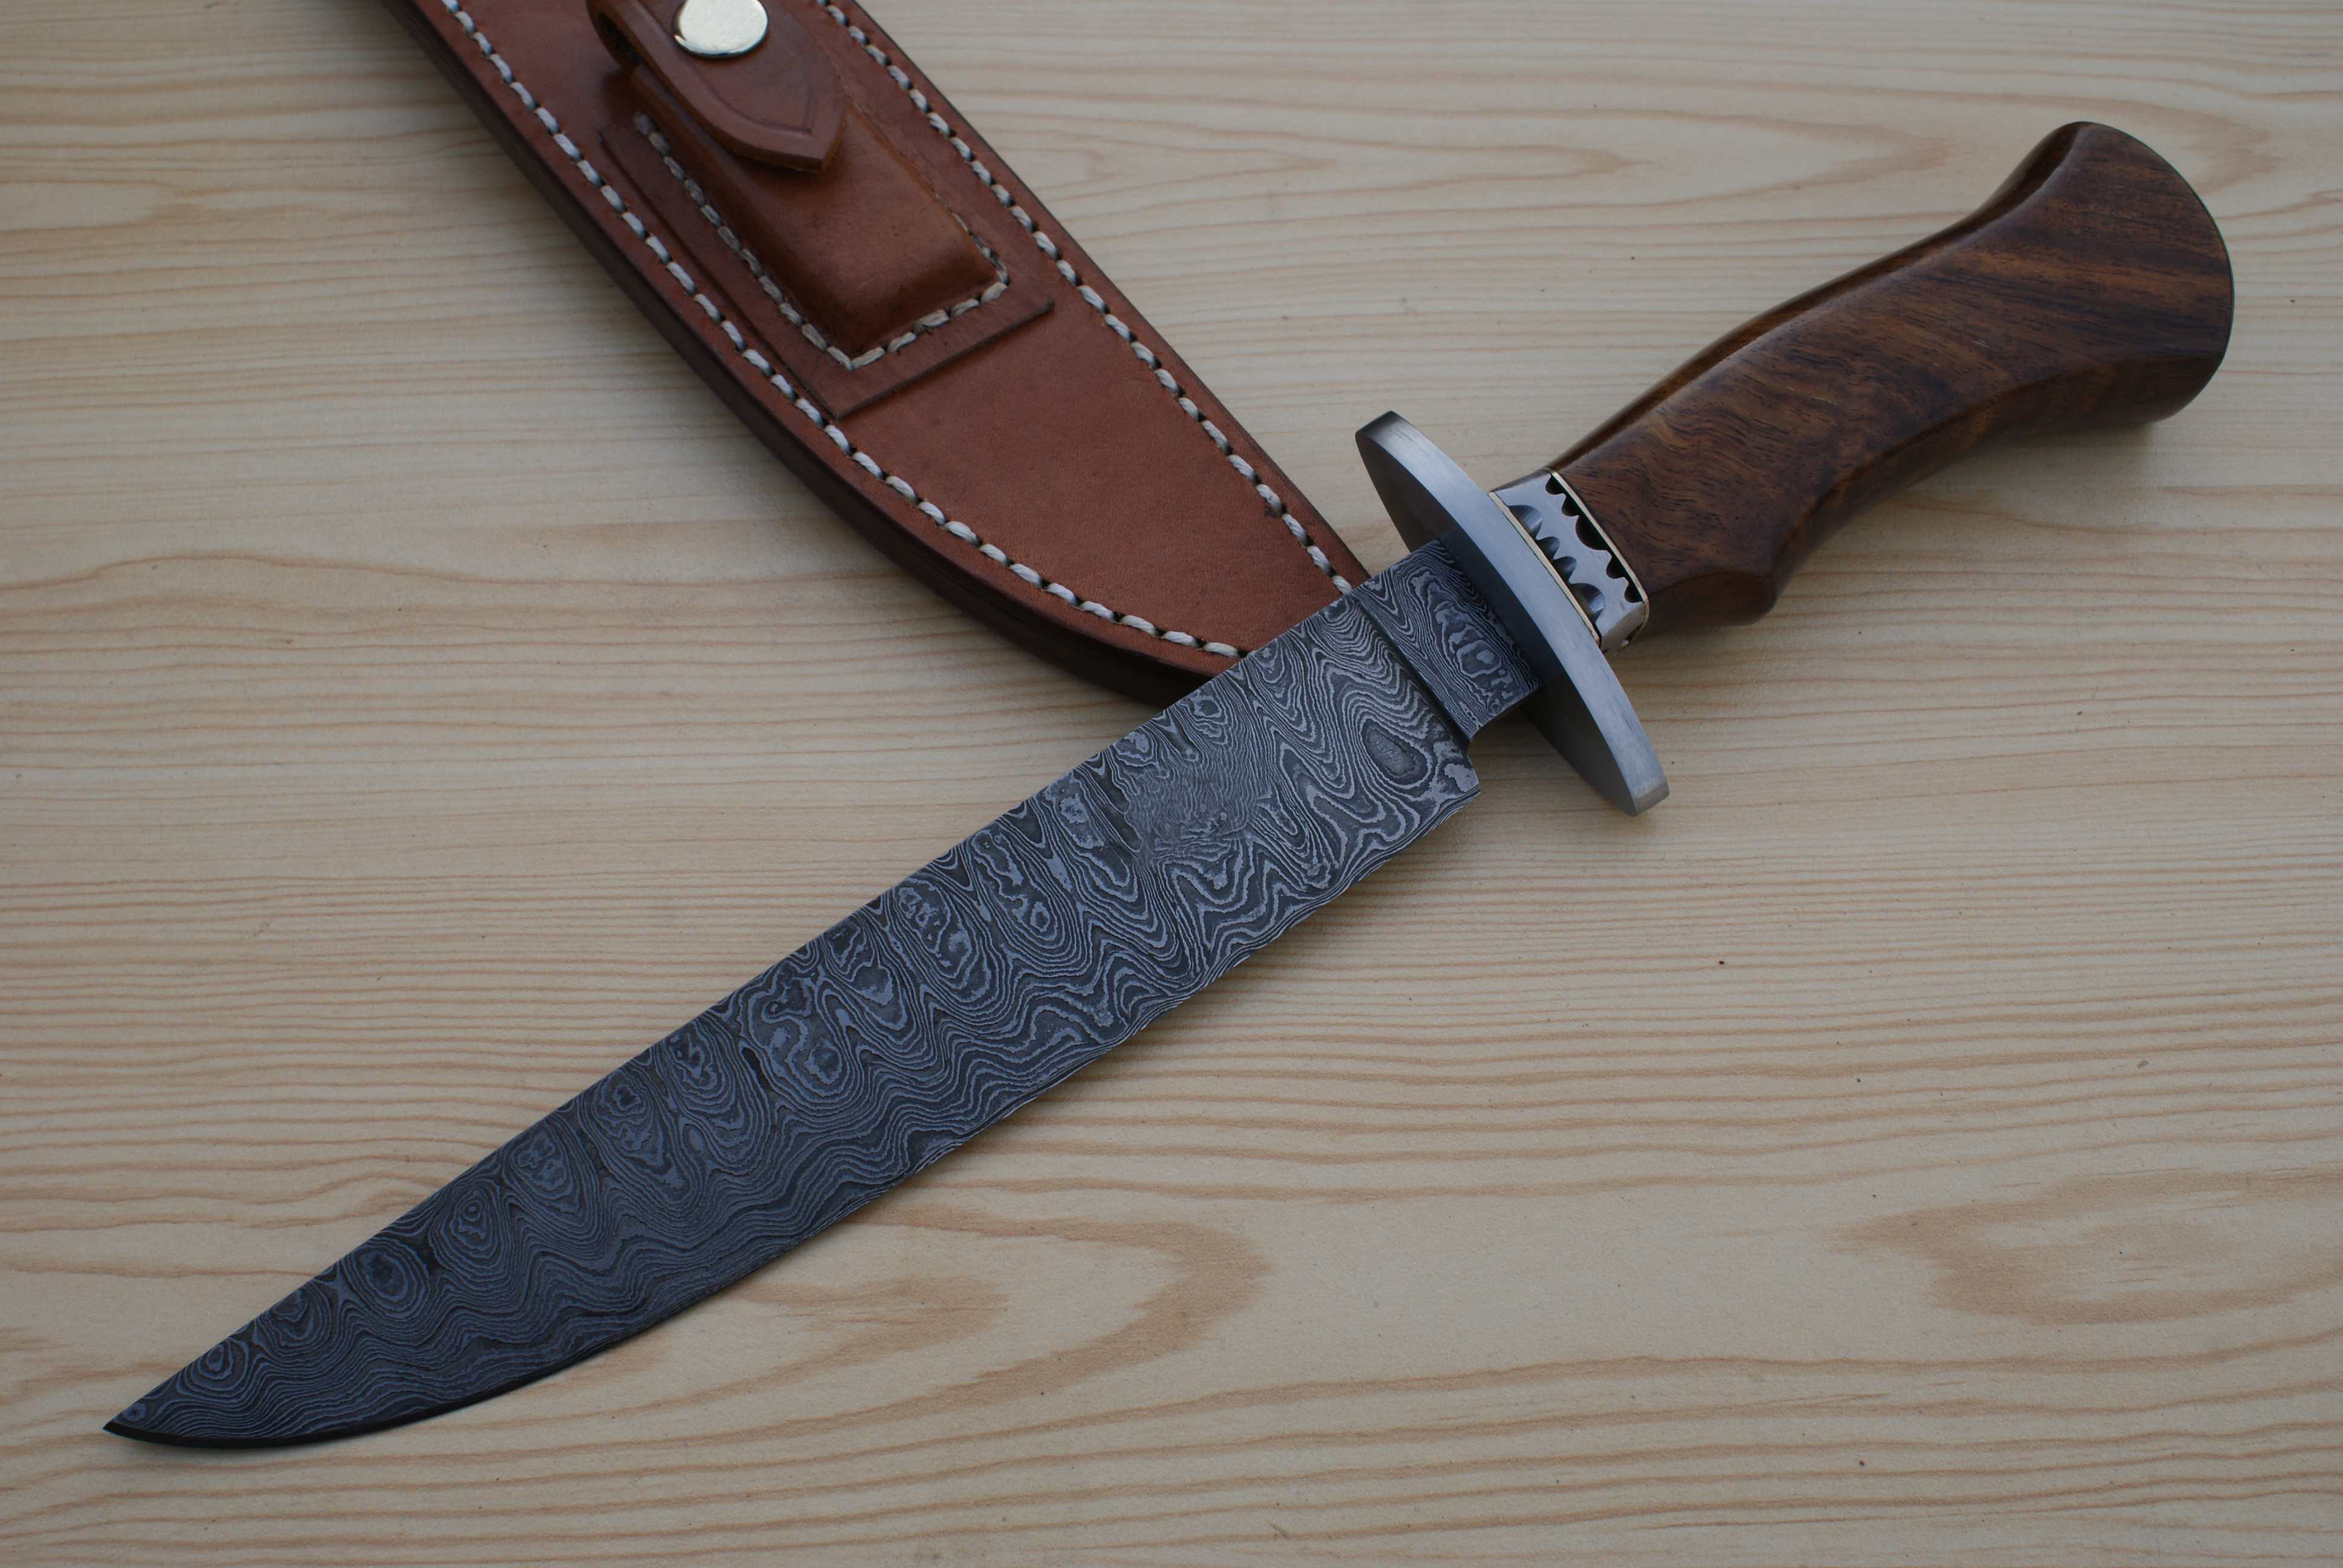 Damascus Bowie Knives